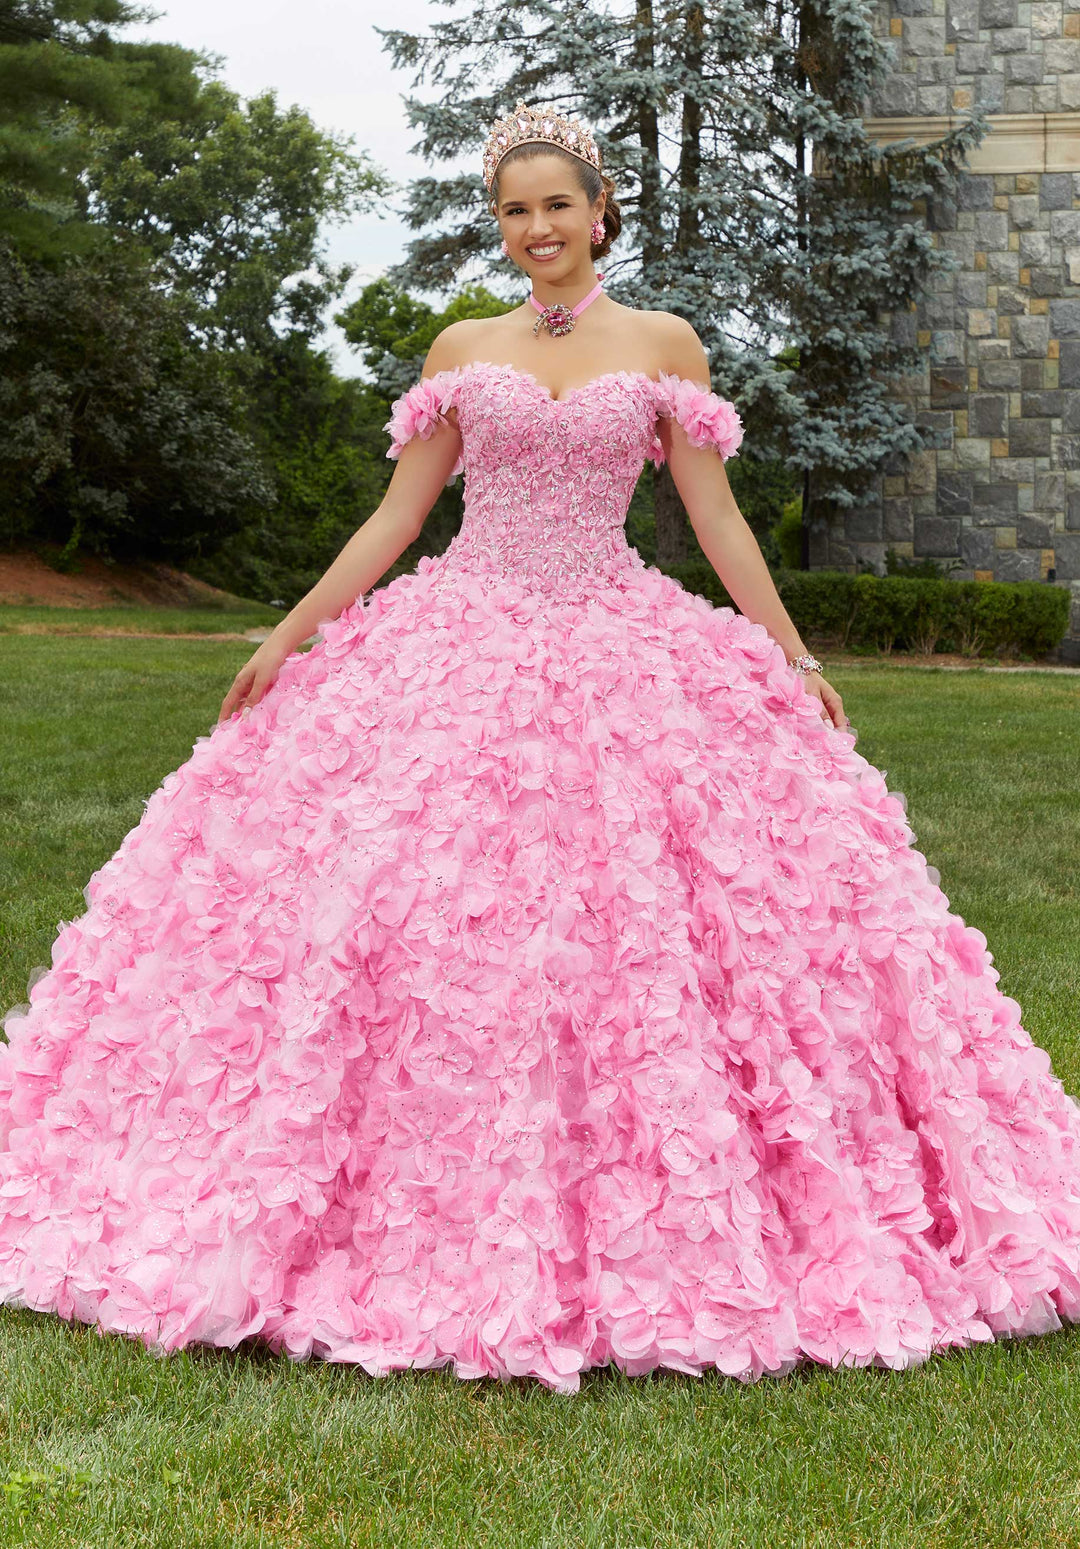 MoriLee #89403 Pink Crystal Beaded Lace Quinceañera Dress with Floral Skirt